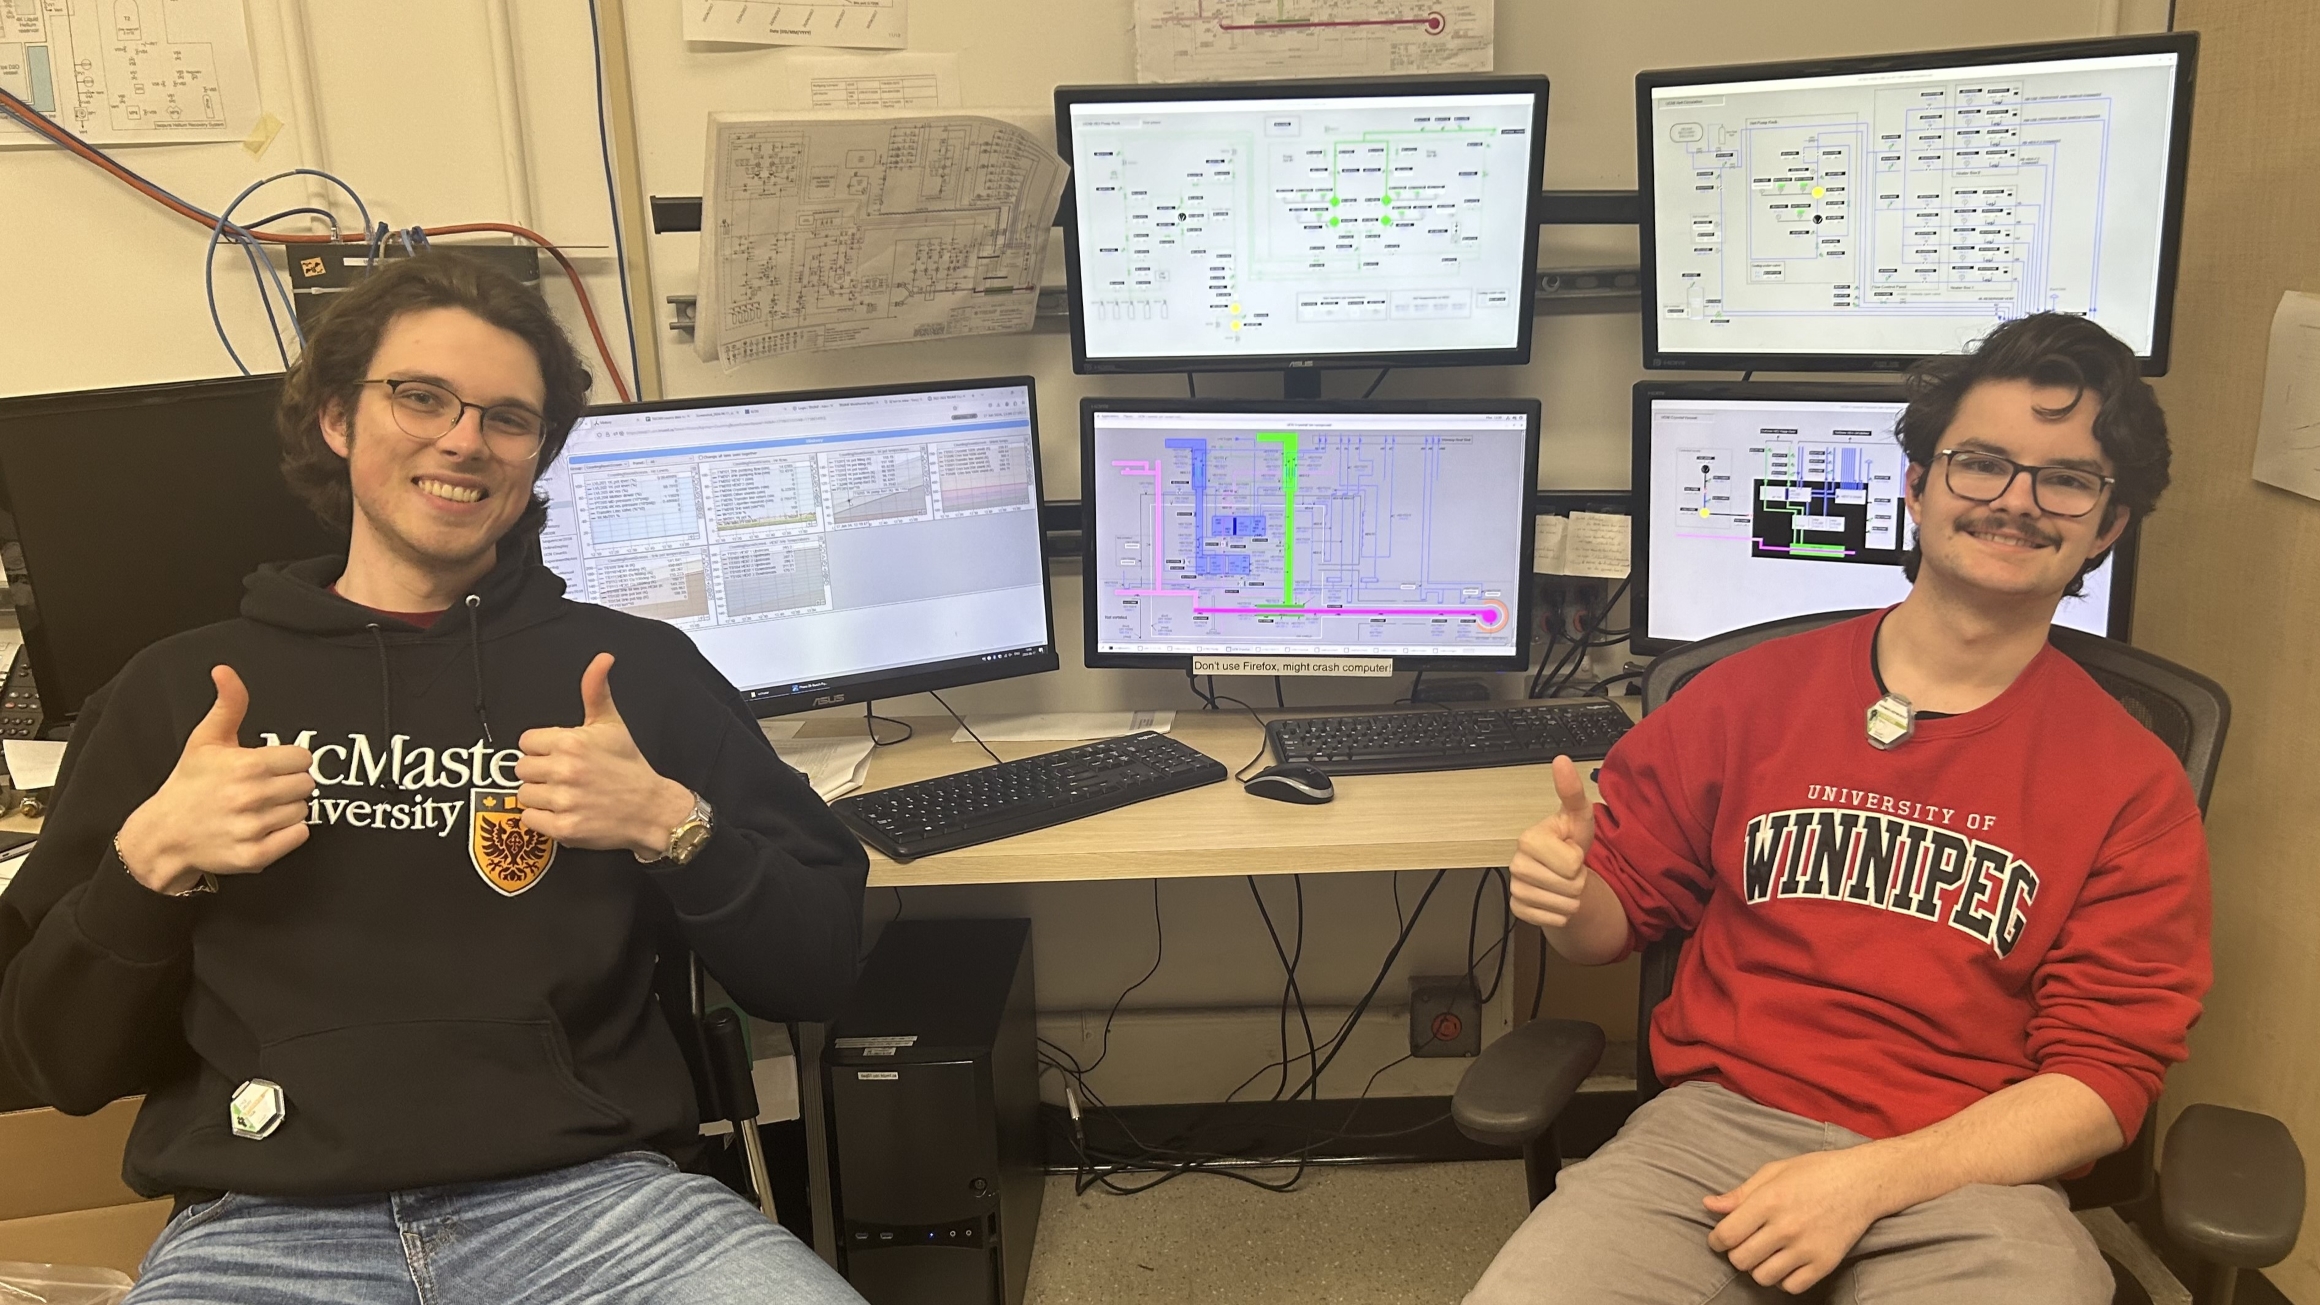 Two students, seated and wearing university sweaters, make a thumbs-up gesture in front of a bank of computer monitors.